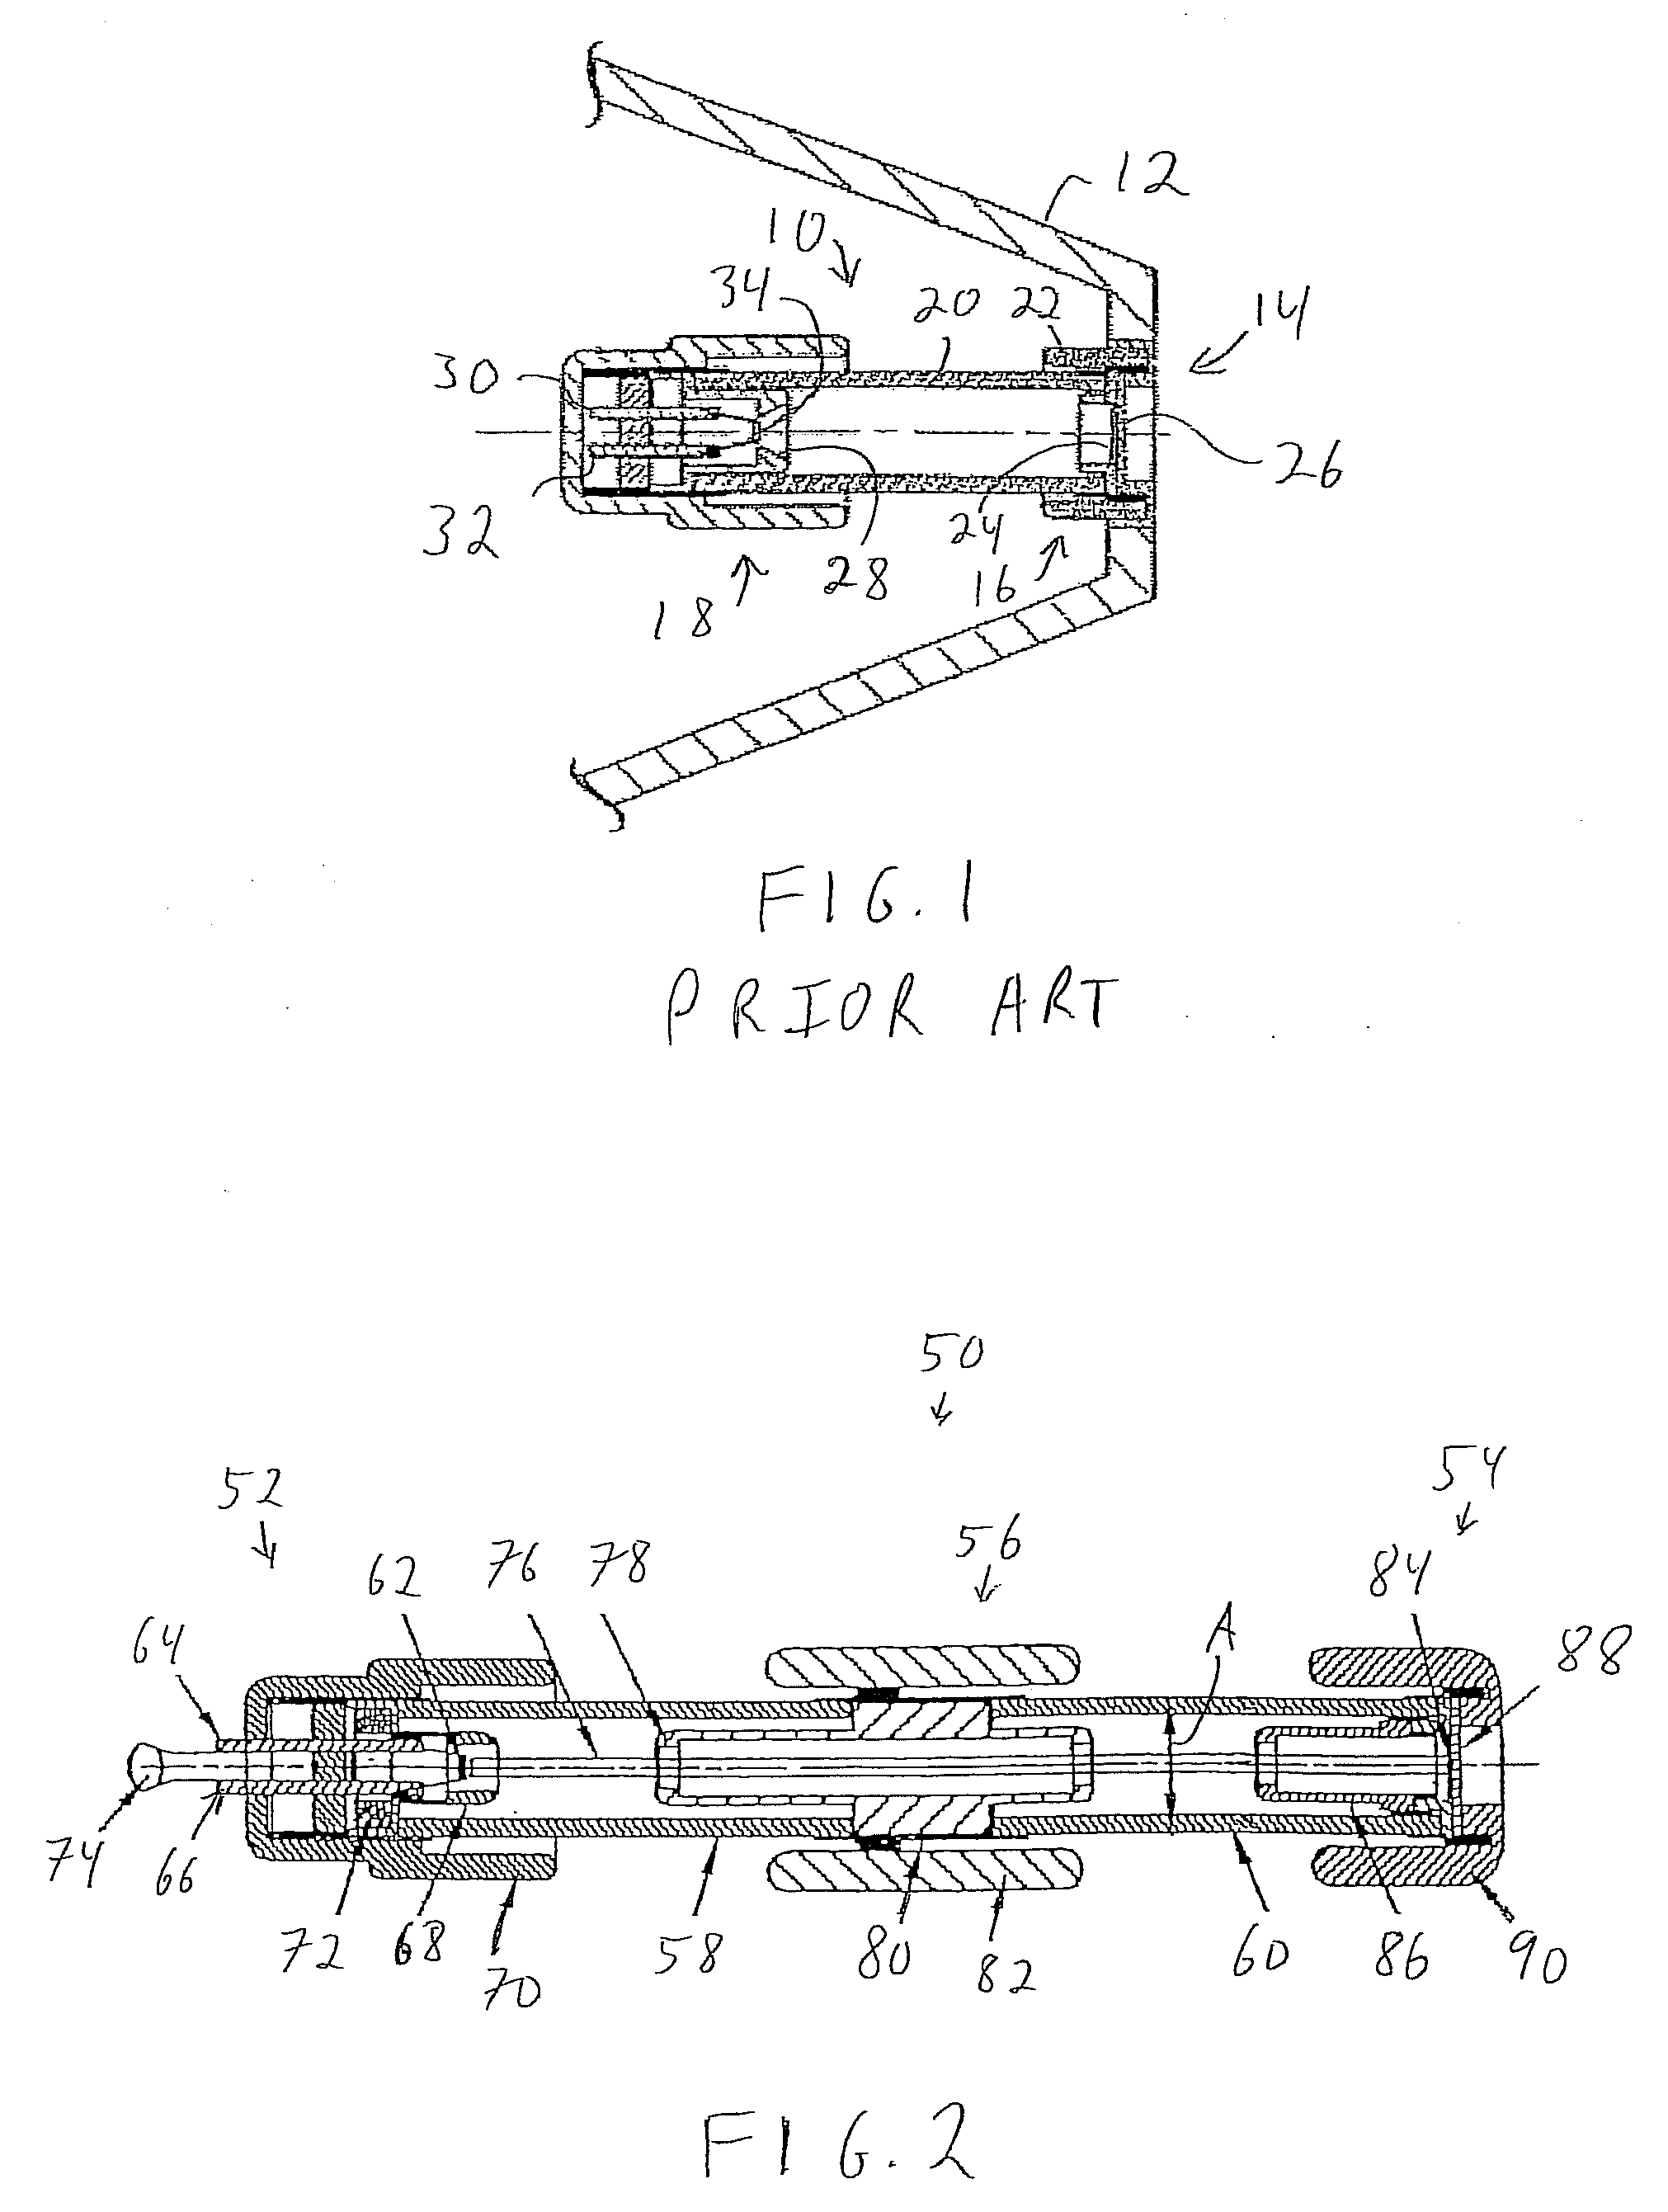 Compact high voltage x-ray source system and method for x-ray inspection applications